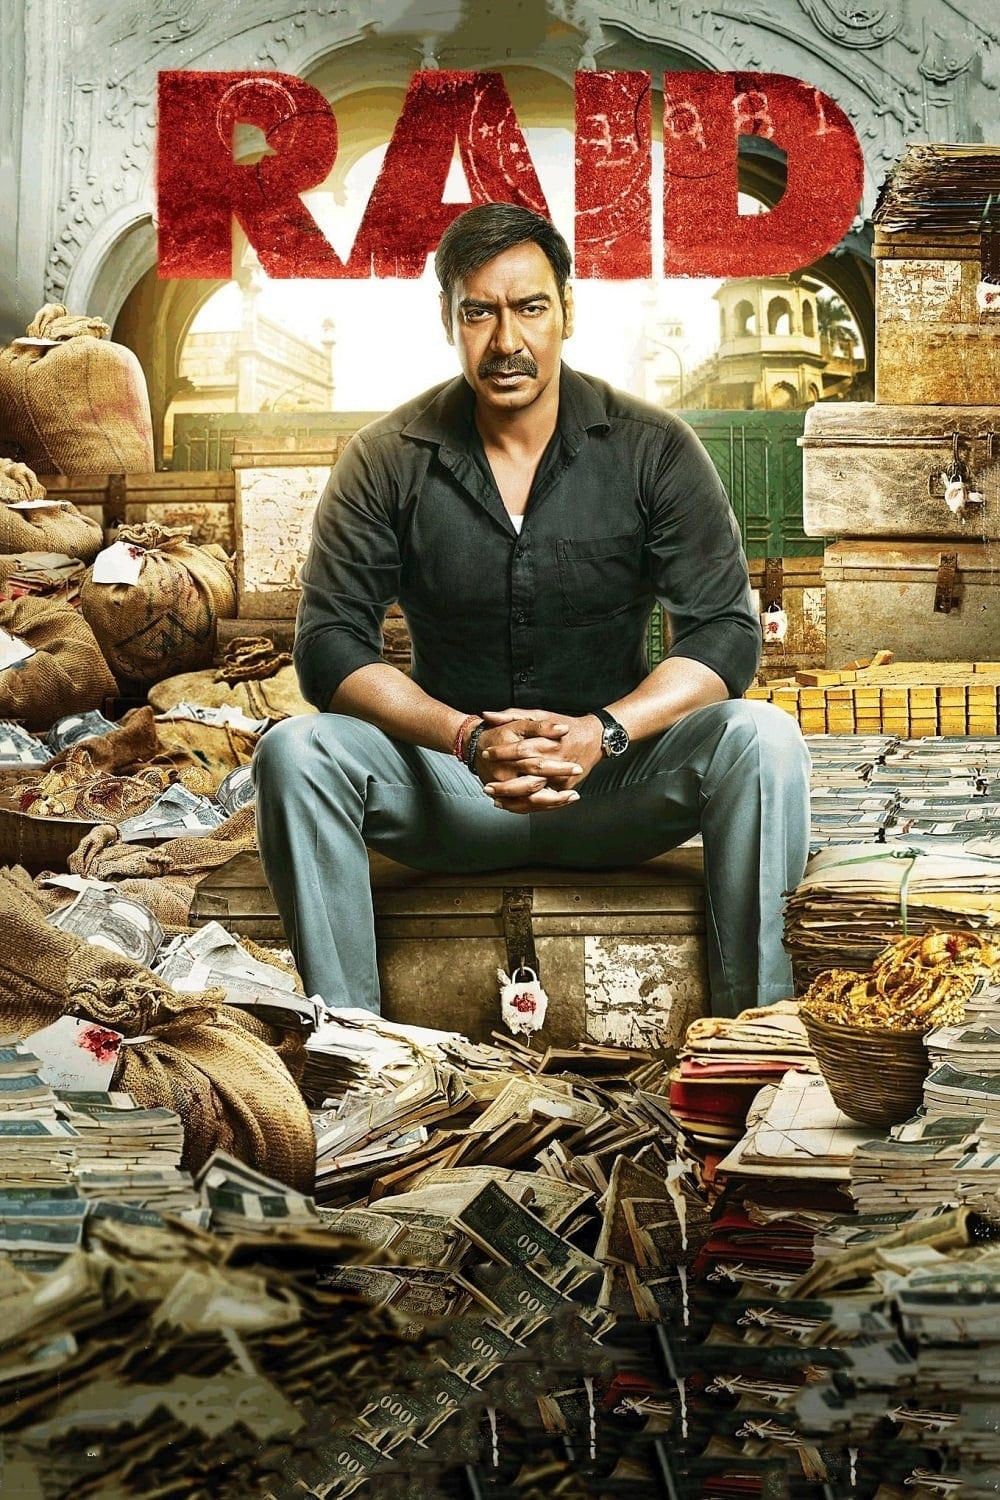 Poster for the movie "Raid"